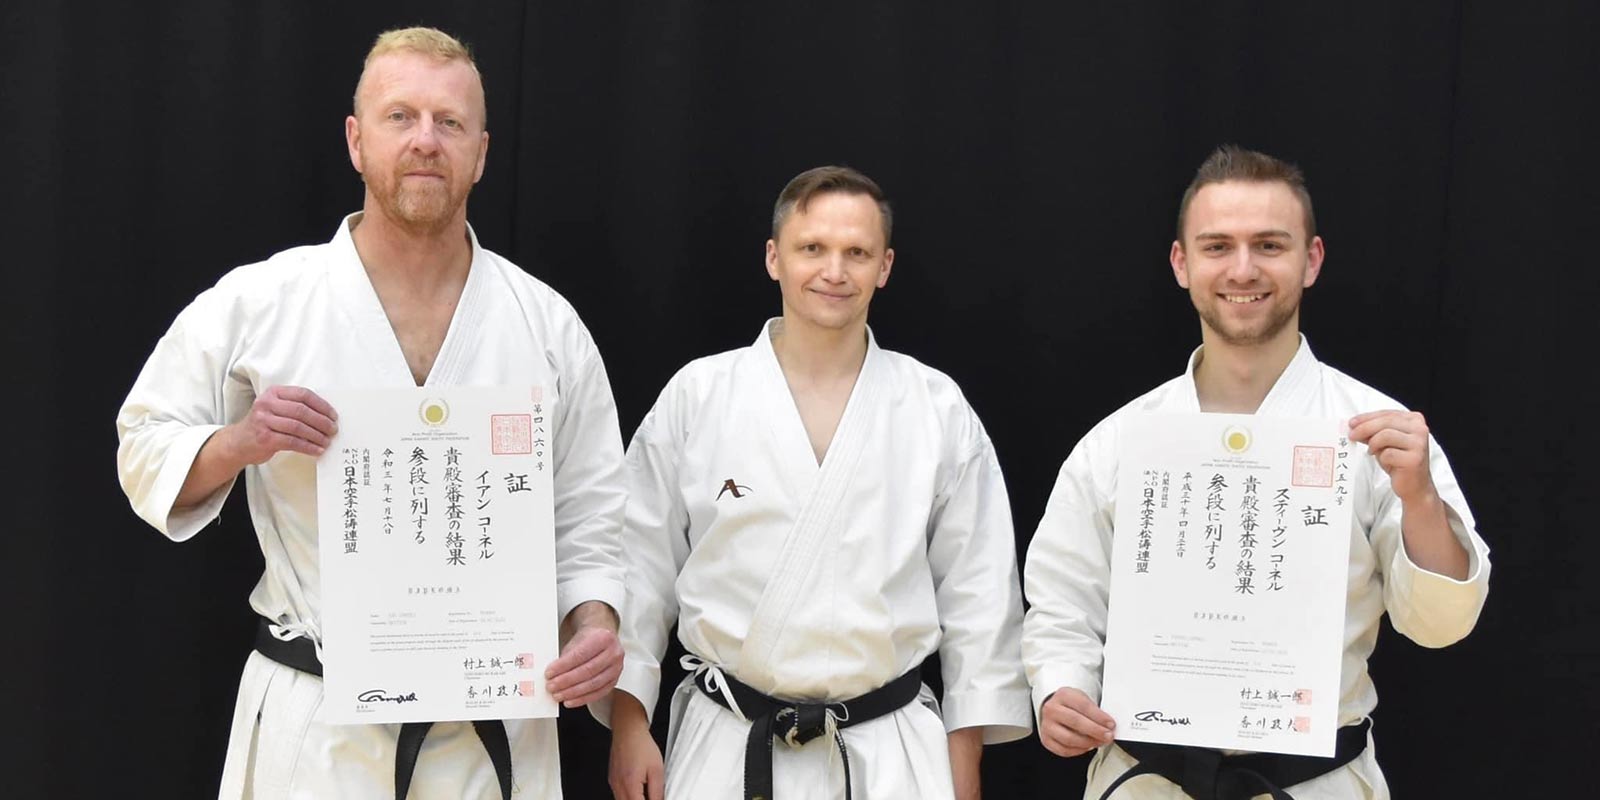 Ian Connell Sensei is presented with his JKS sandan diploma from Japan